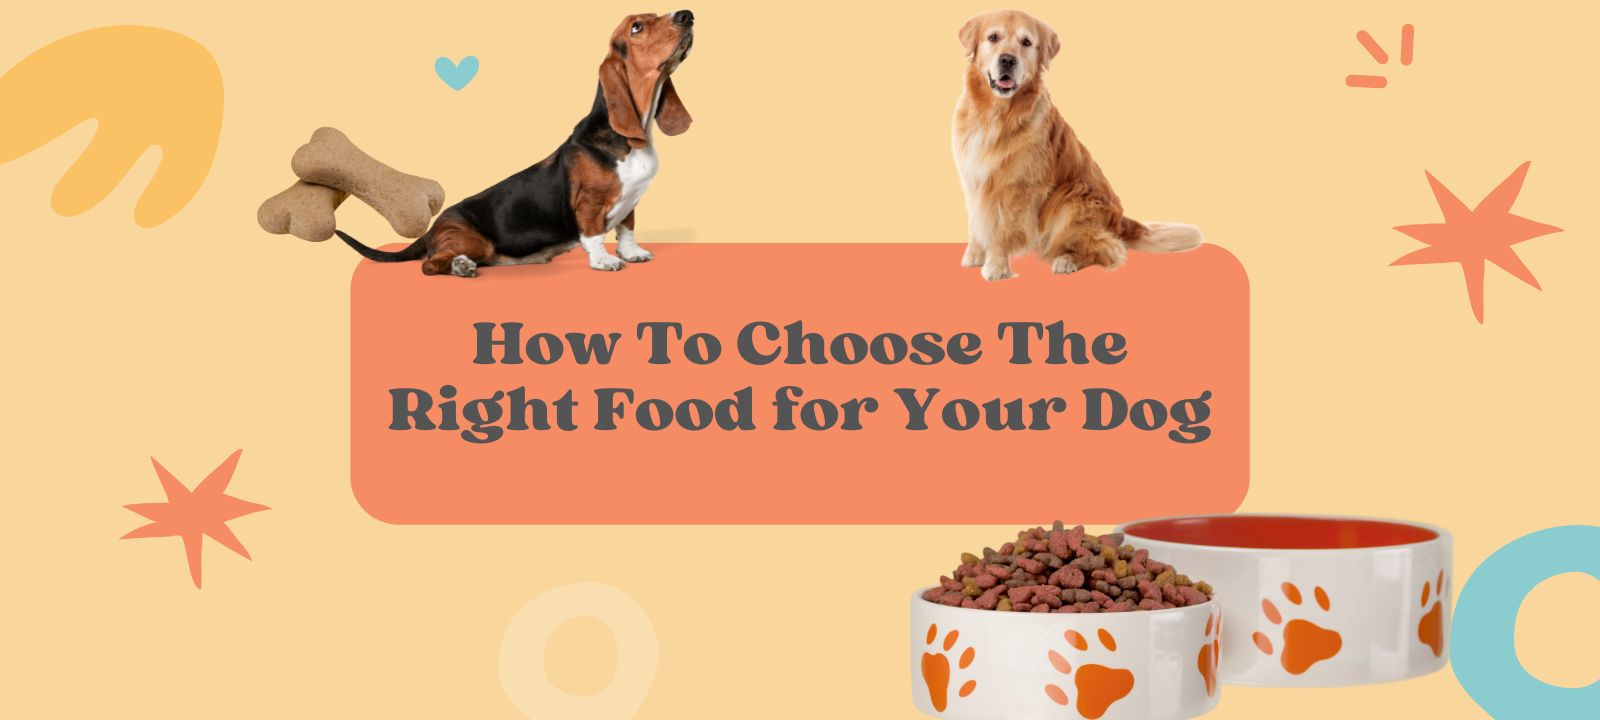 Choose The Right Food for Your Dog